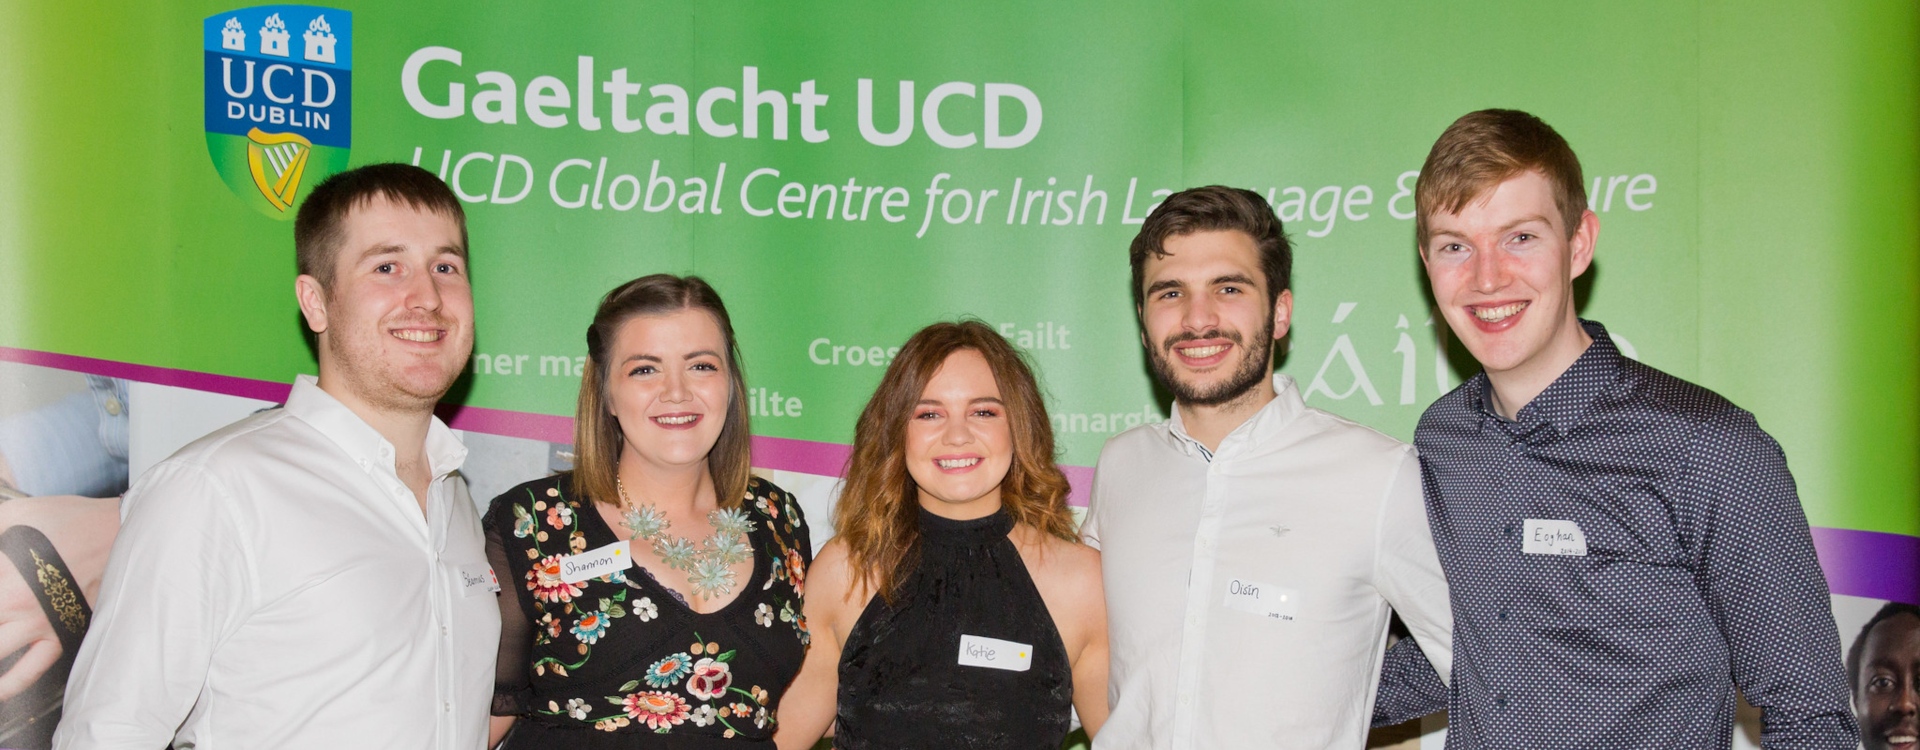 Five Gaeltacht UCD students standing and smiling together in front of the Gaeltacht UCD banner filling the background